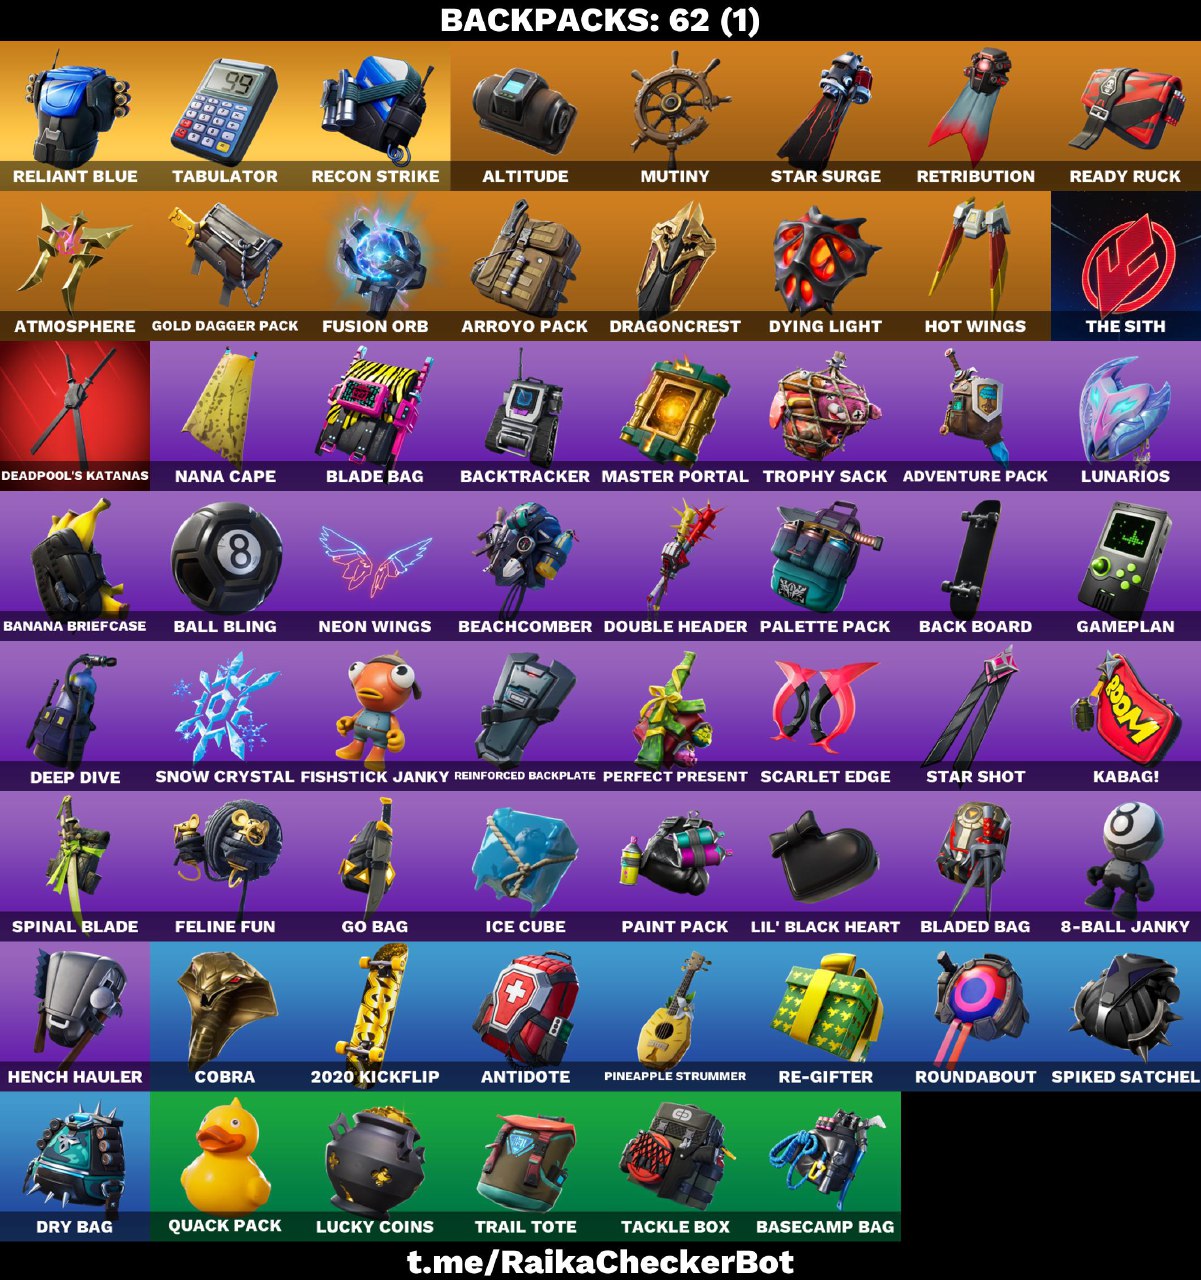 FULL ACCESS | 57 SKINS | GLOW | POINT PATROLLER | PRODIGY | TRILOGY | RELIANT BLUE | TABULATOR | RECON STRIKE | COAXIAL BLUE | FUSION COIL |